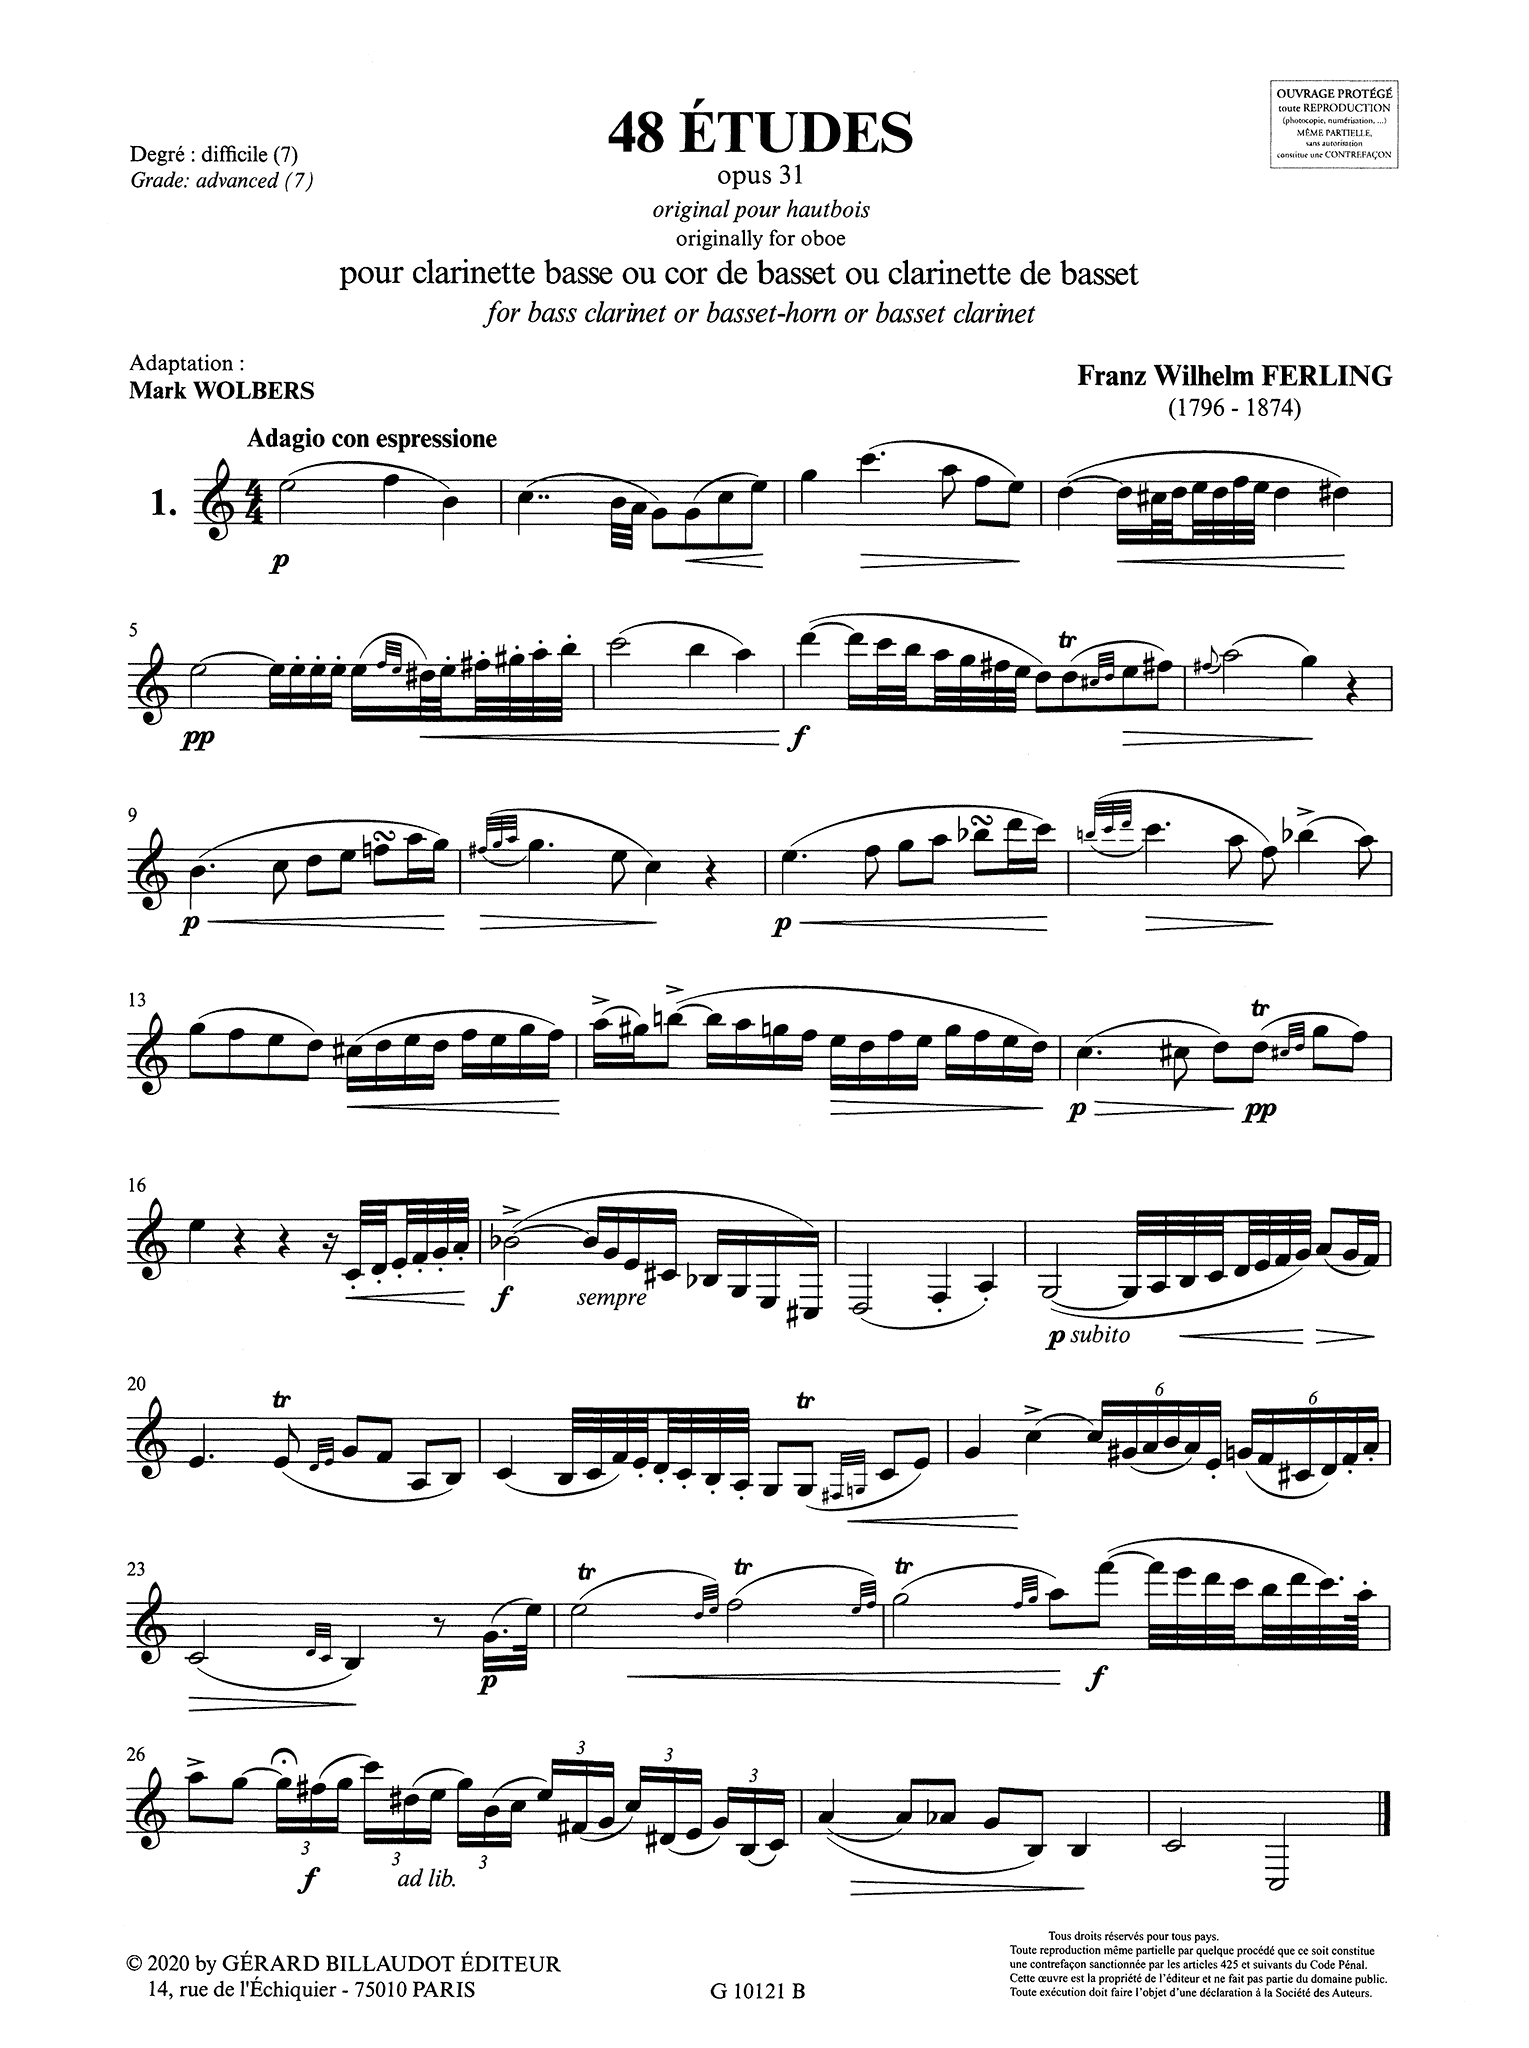 Ferling4 8 Études for low clarinets arranged by Mark Wolbers study no. 1